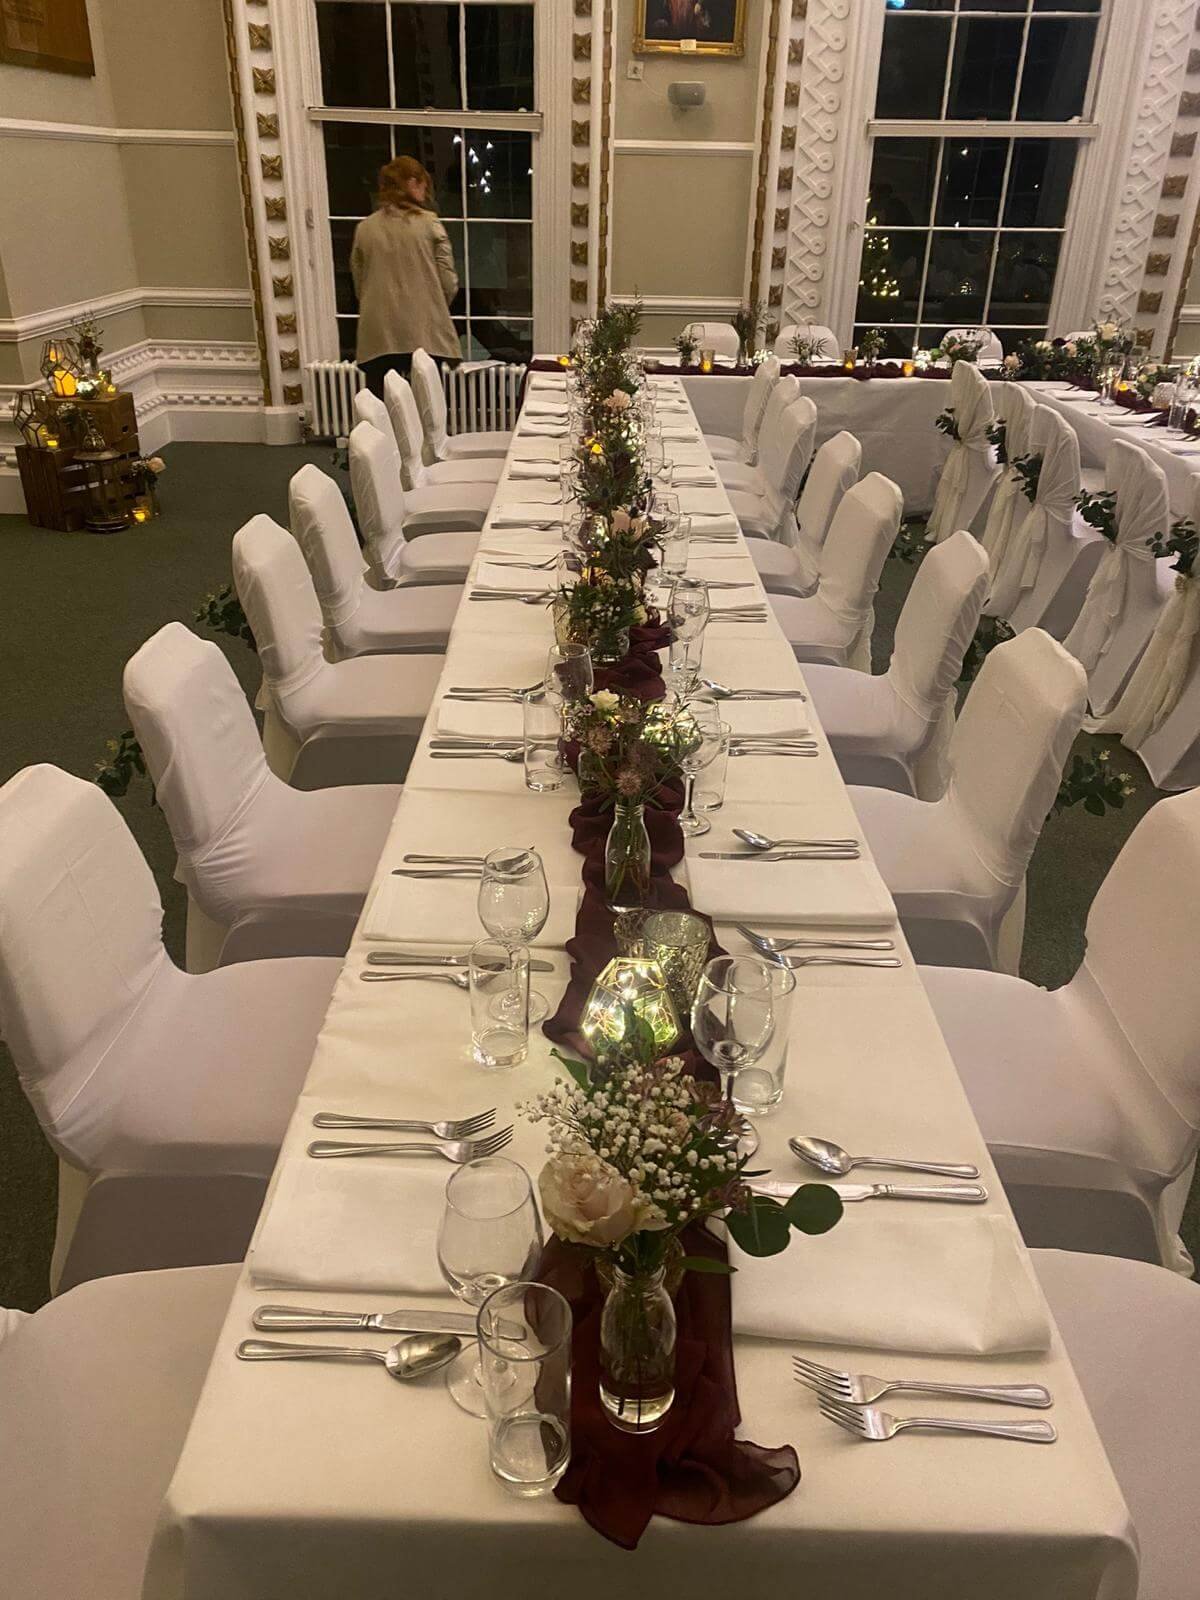 arundel_town_hall_long_table_wedding_sussex_hire.jpg